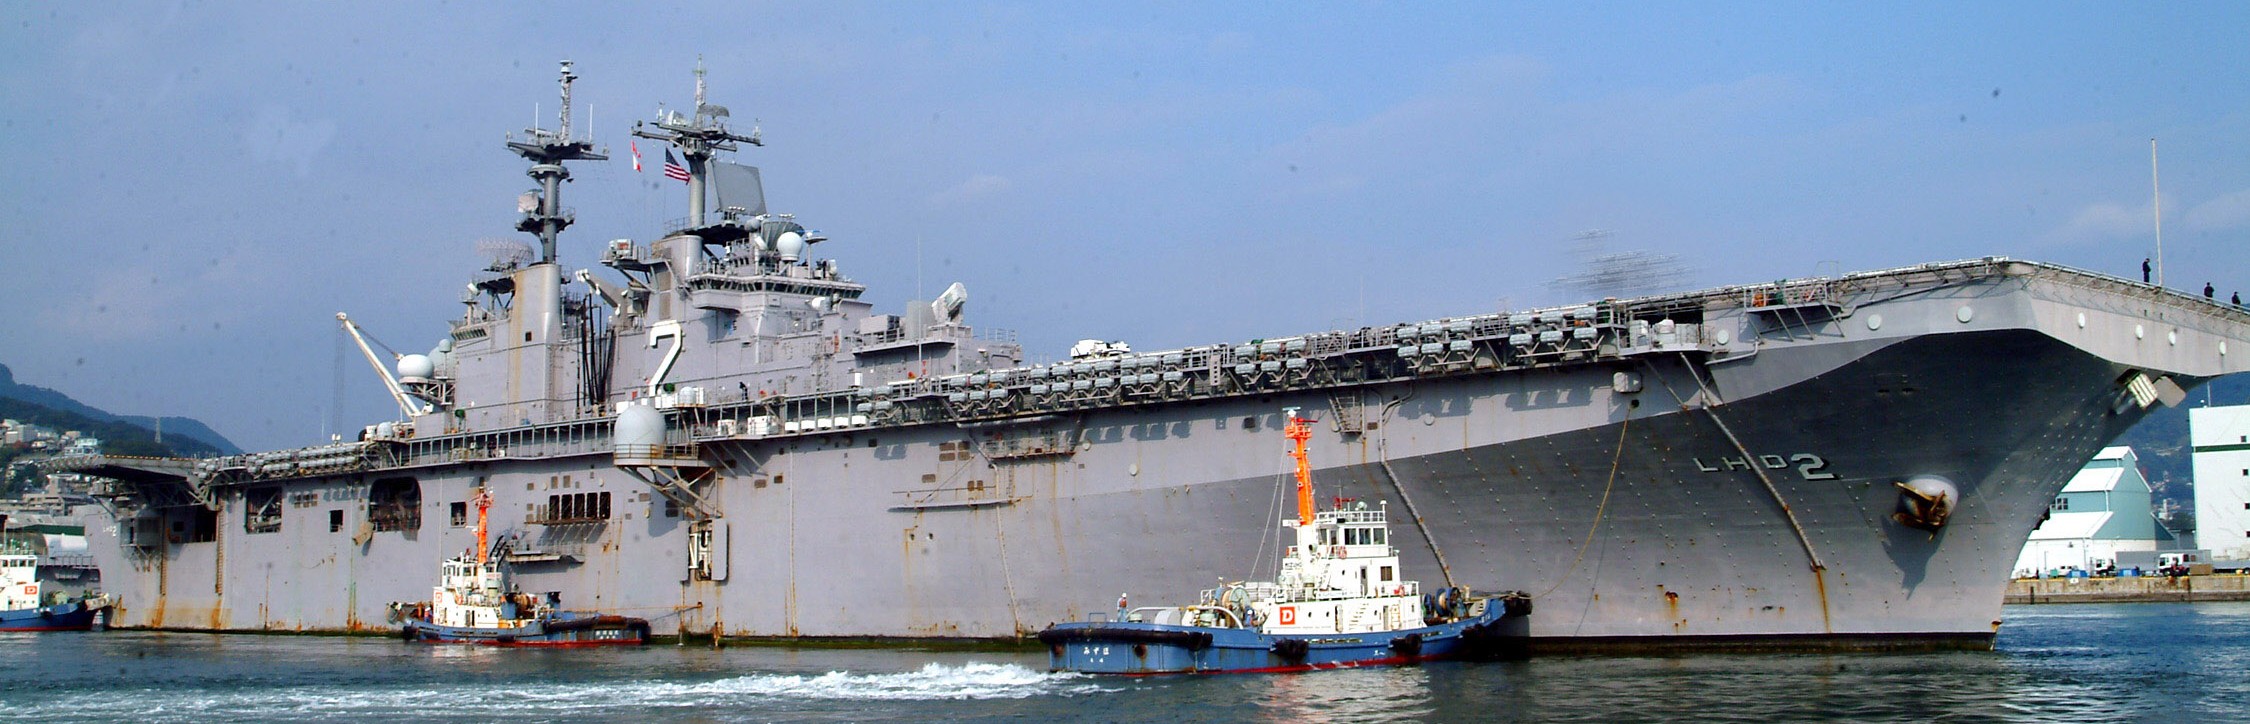 lhd-2 uss essex wasp class amphibious assault ship landing helicopter us navy marines sasebo japan 42